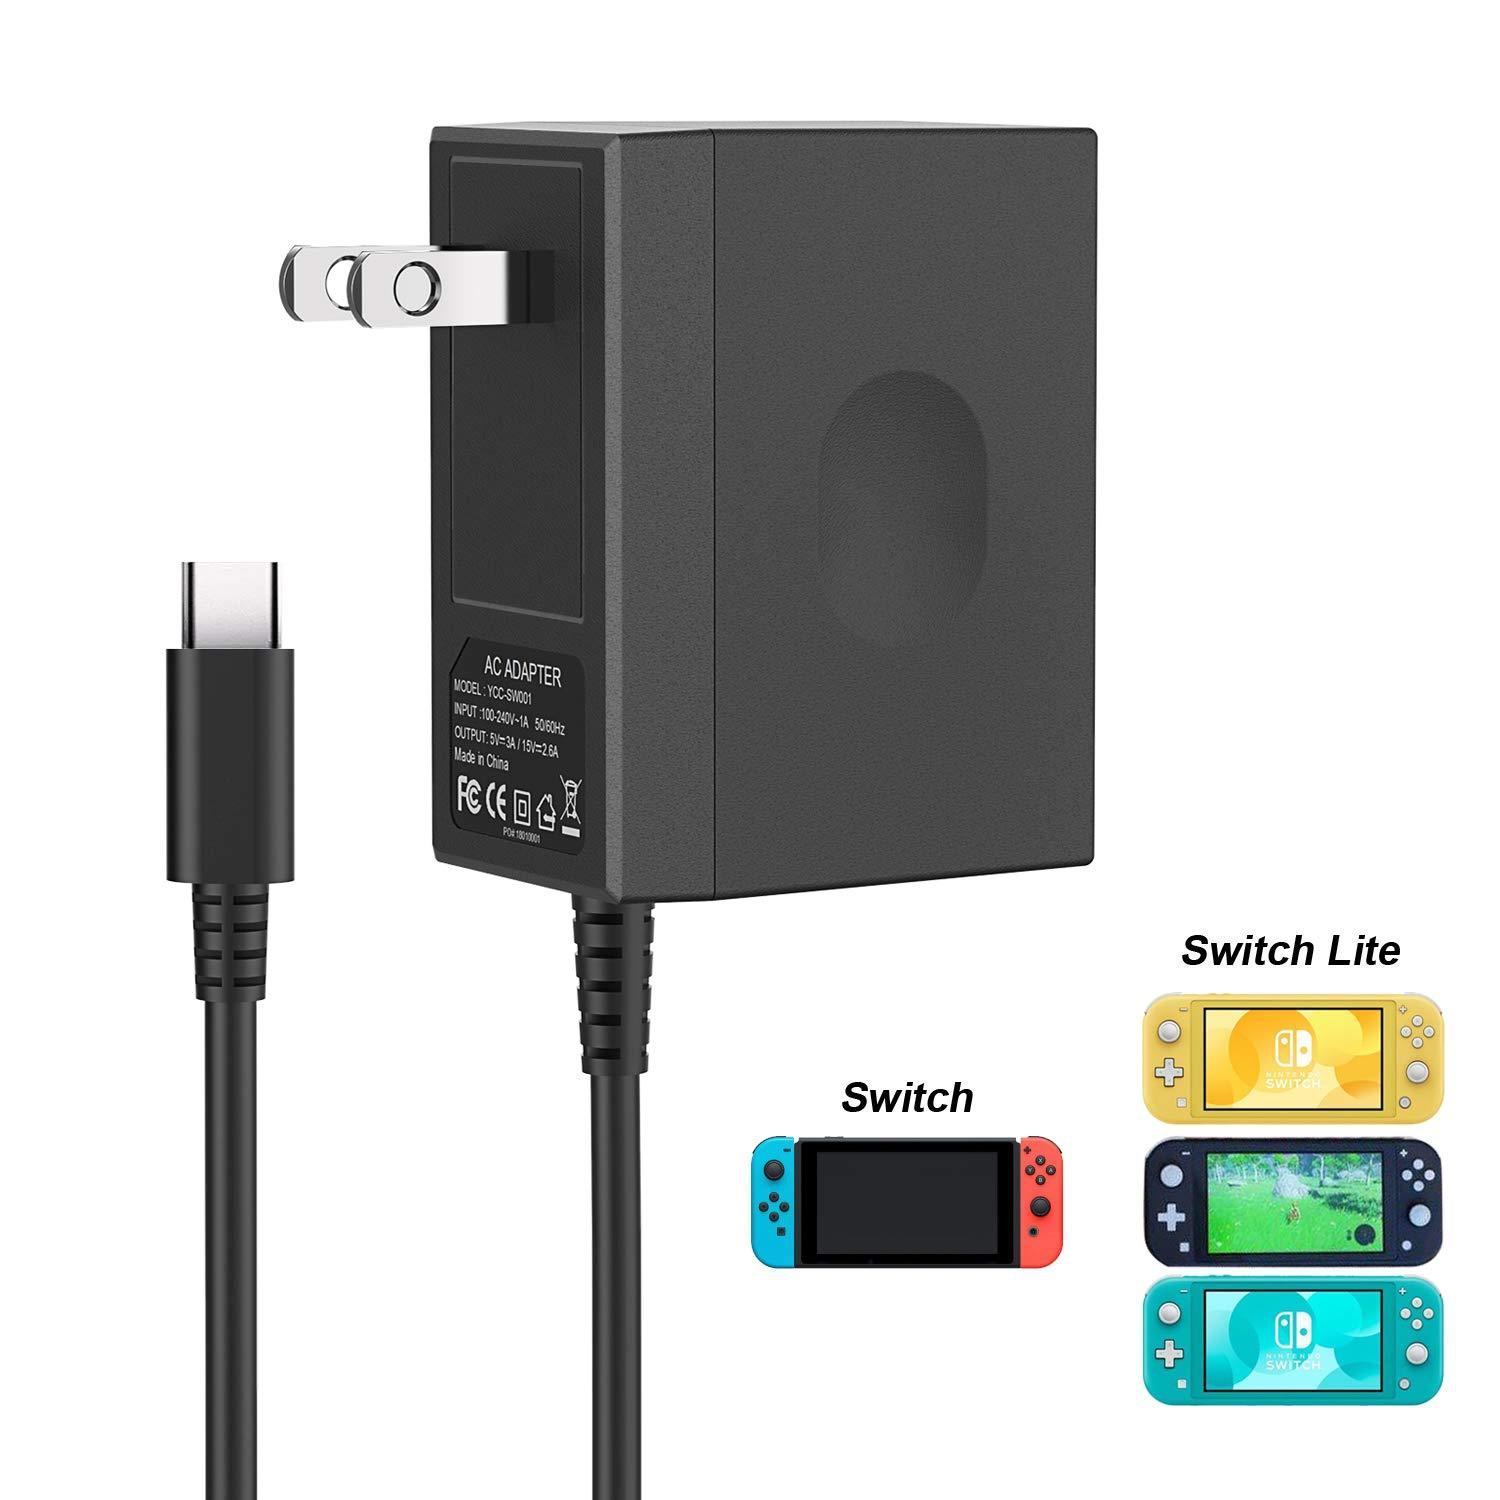 Charger for Nintendo Switch Lite / Switch, [Latest Version] YCCSKY...